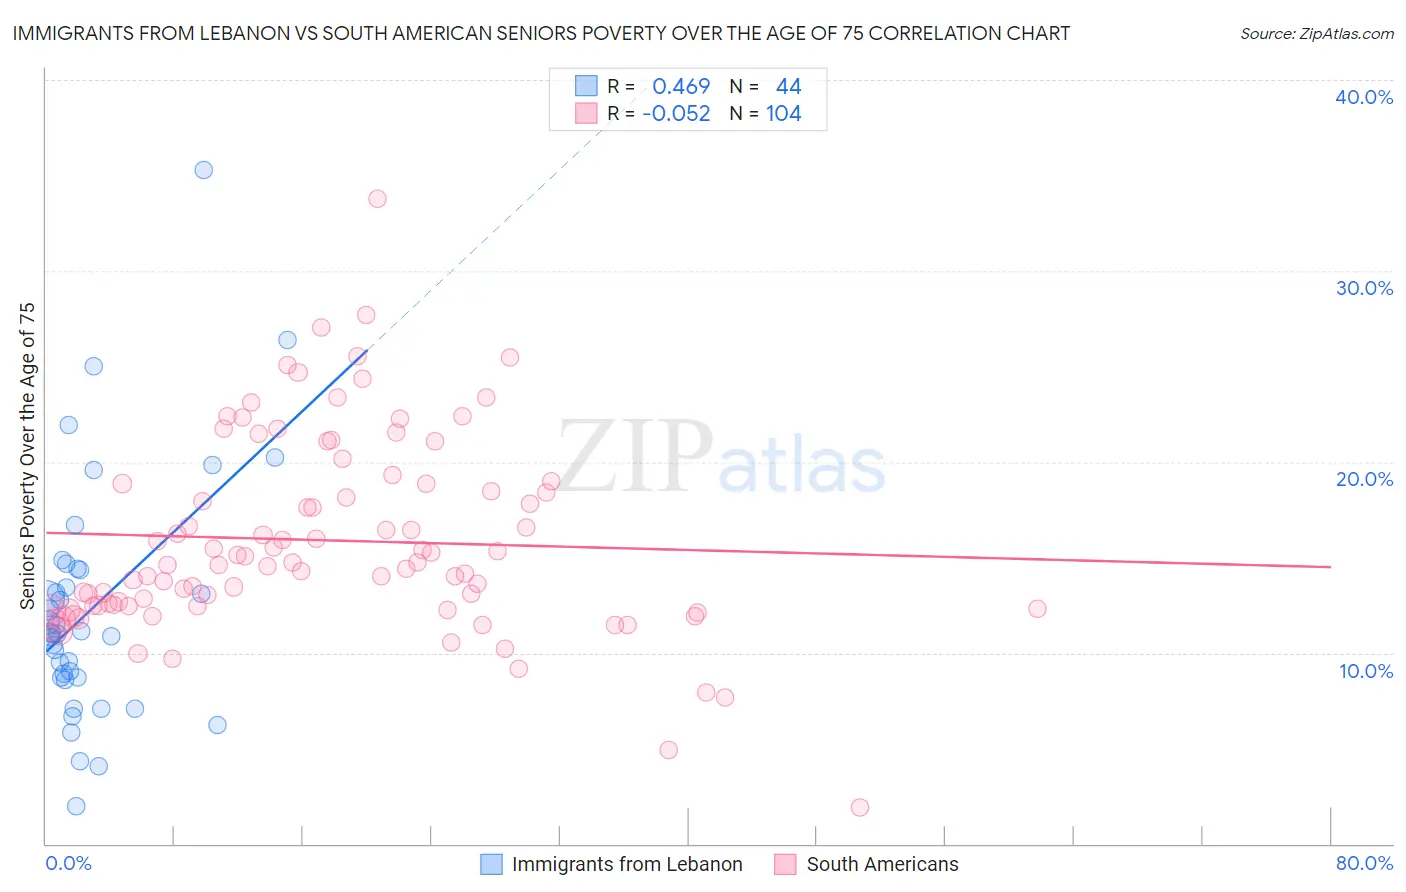 Immigrants from Lebanon vs South American Seniors Poverty Over the Age of 75